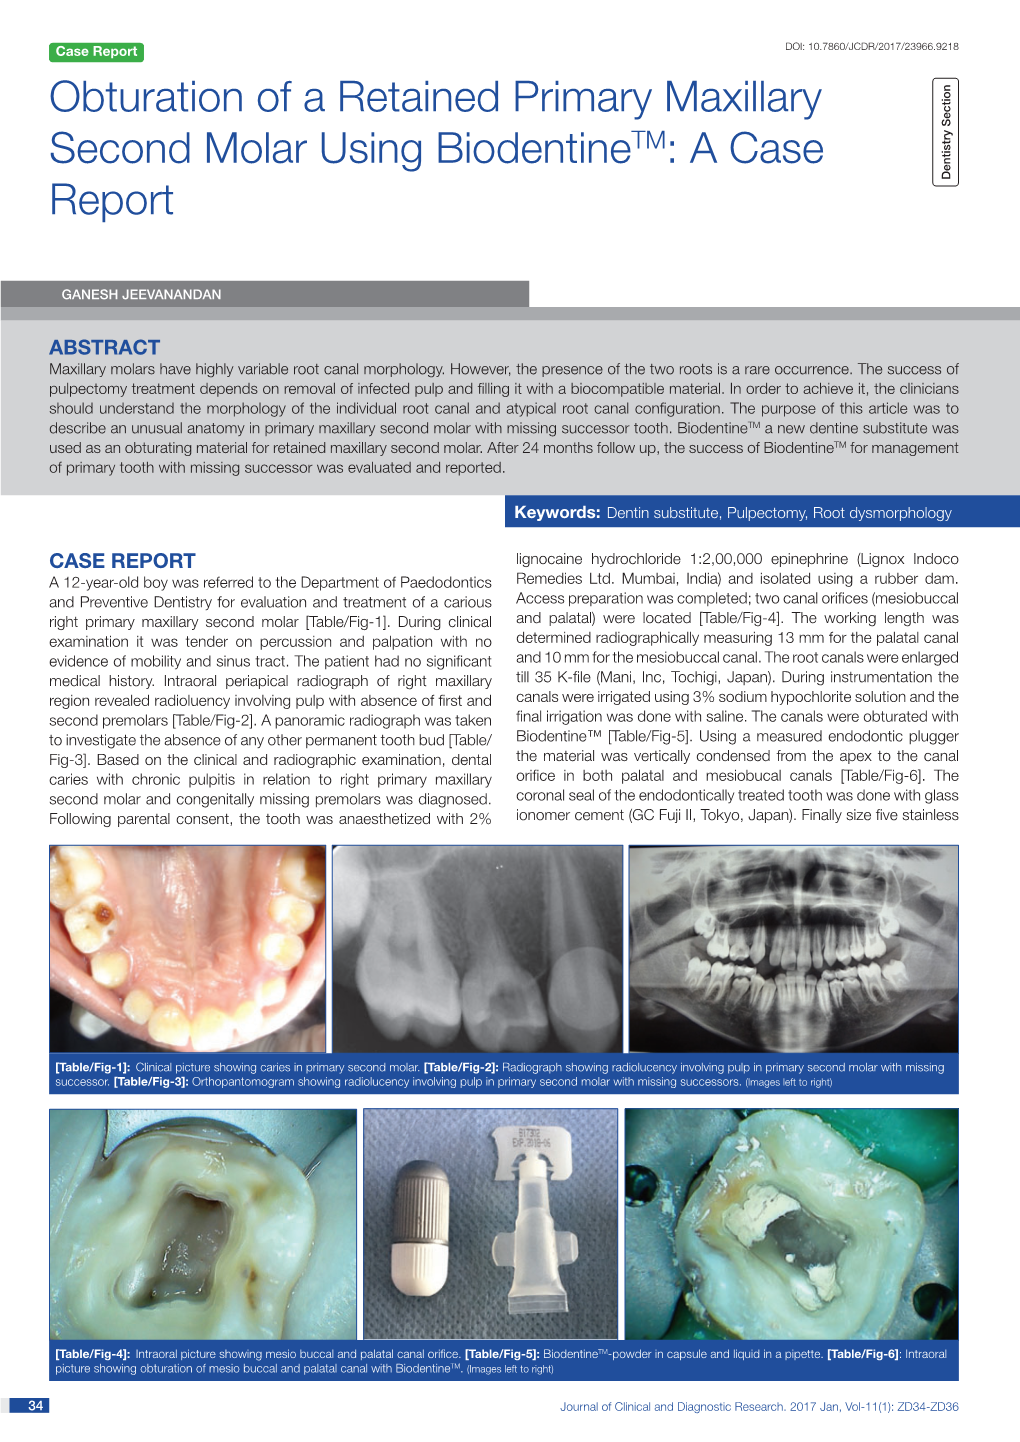 Obturation of a Retained Primary Maxillary Second Molar Using Biodentinetm: a Case Dentistry Section Report